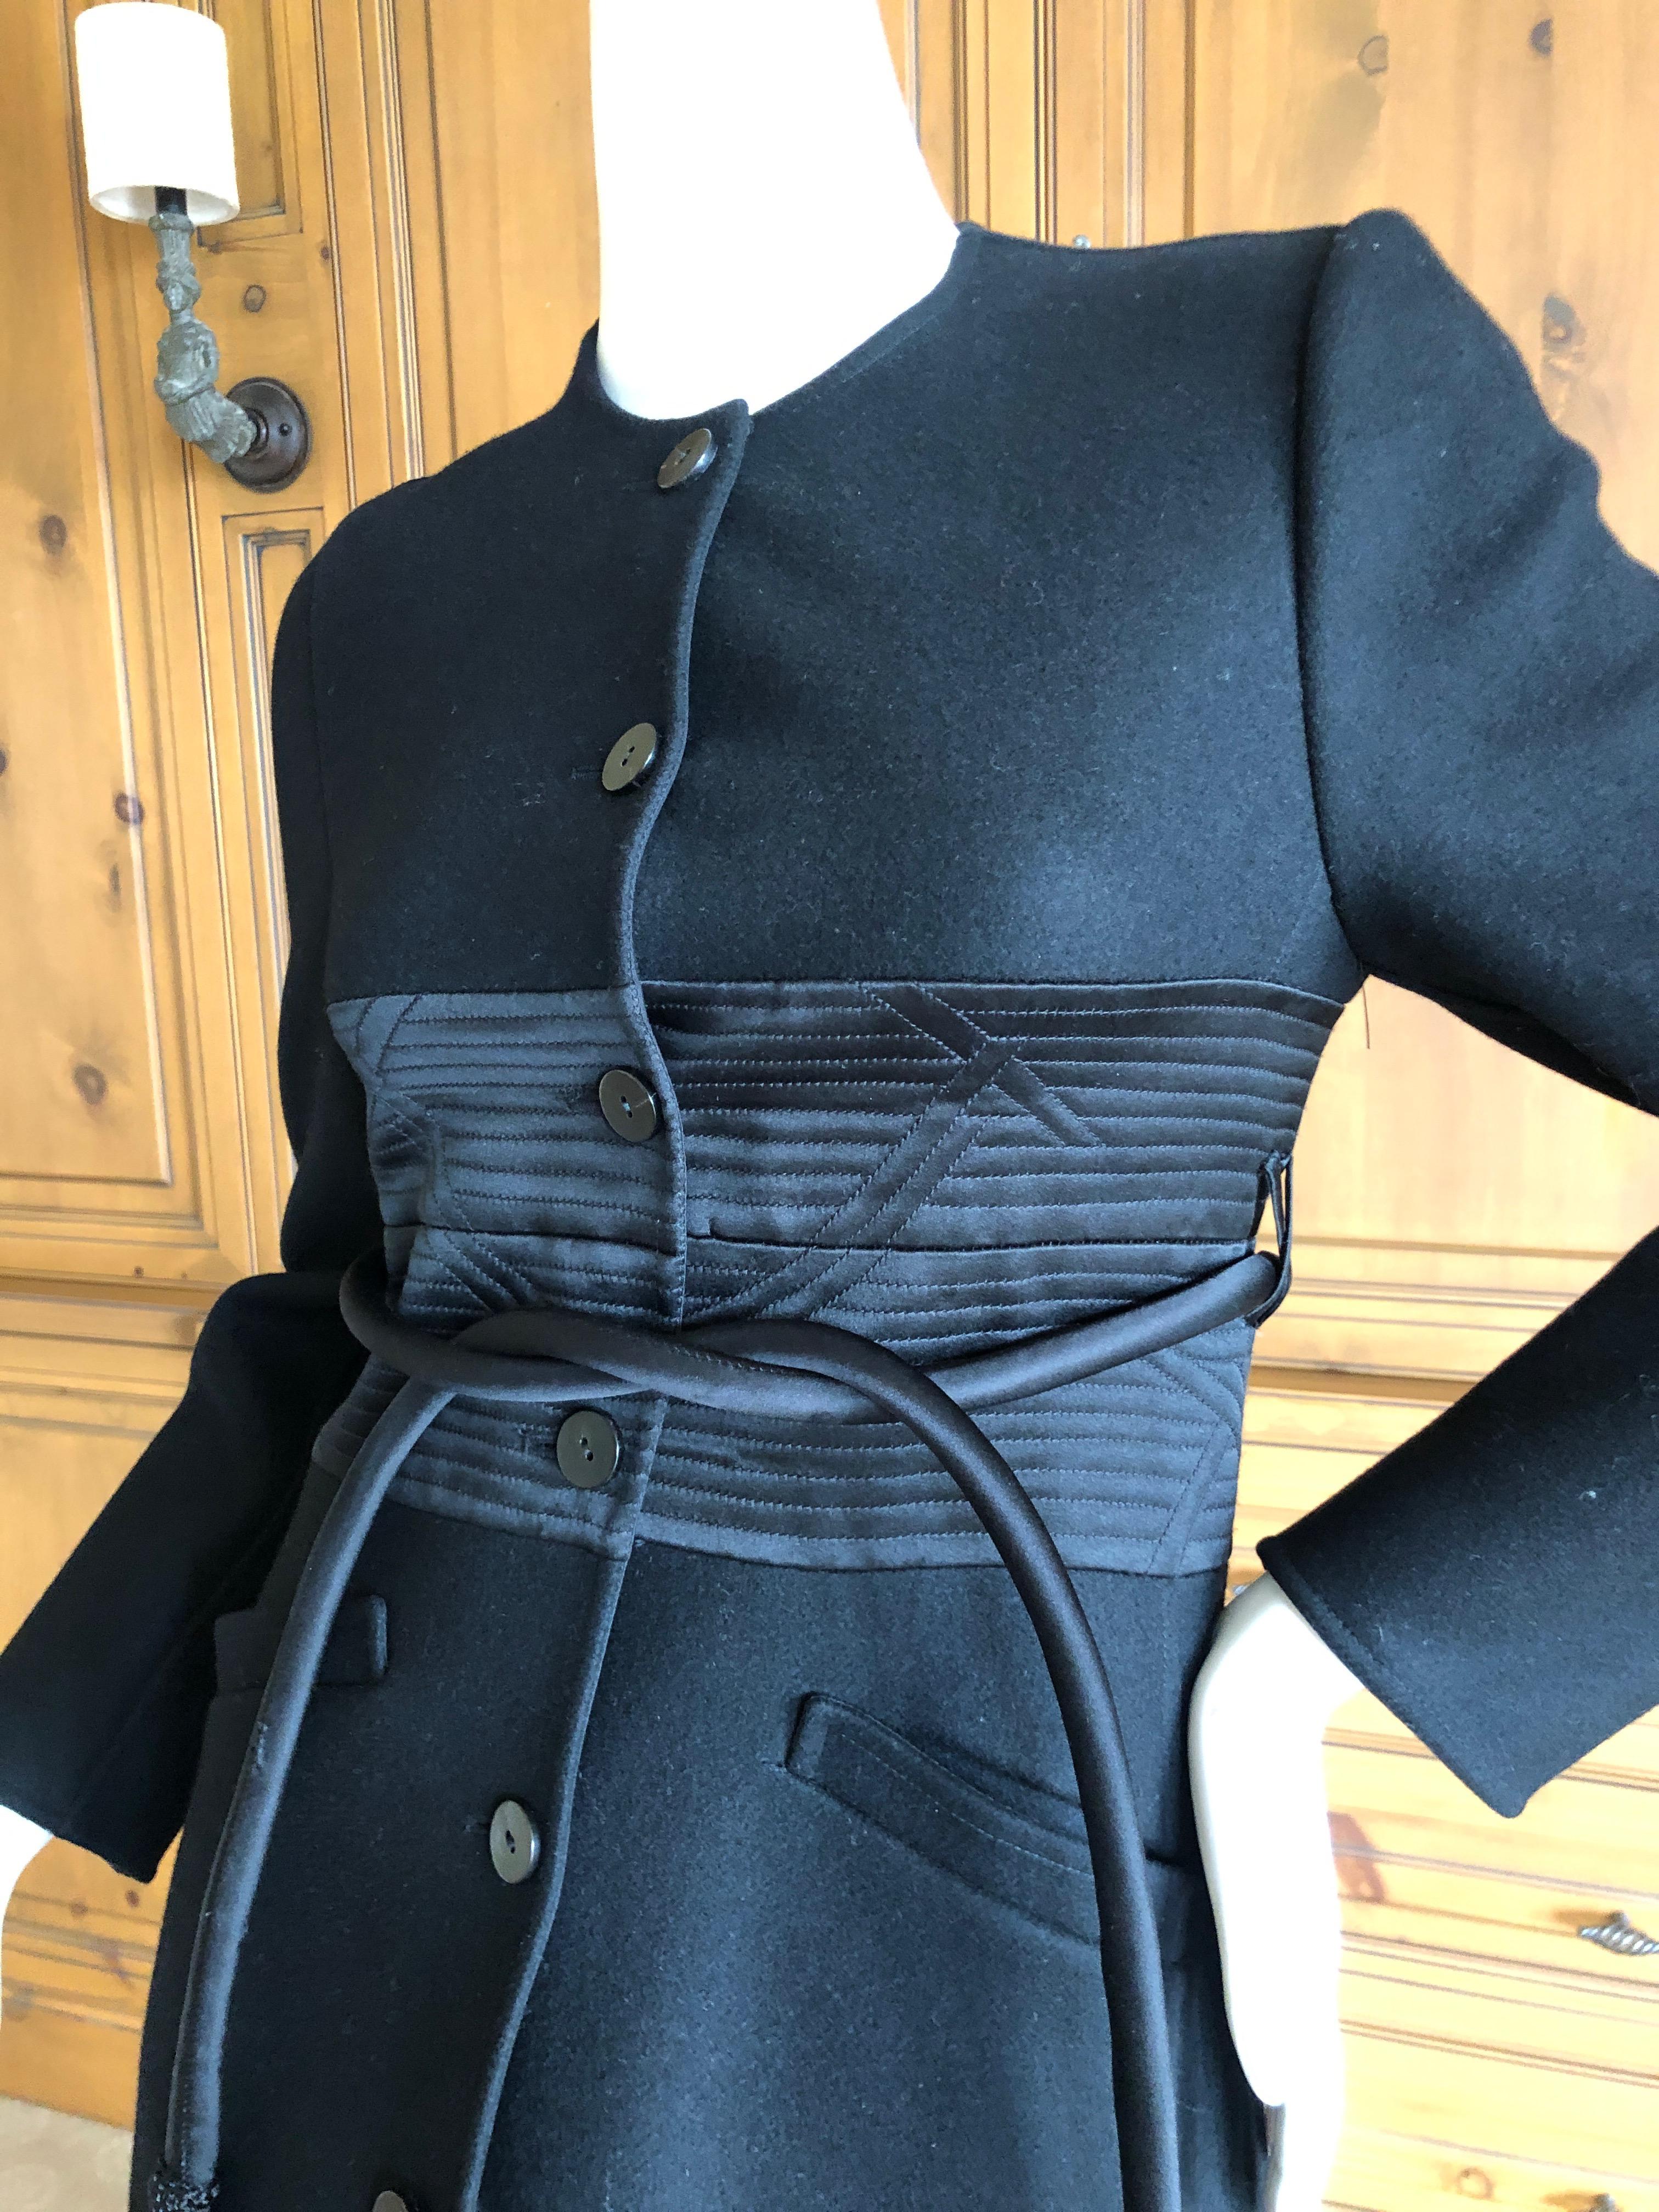 Chado Ralph Rucci Luxurious Long Black Coat with Obi Belt and Tassel Tie XS In Excellent Condition For Sale In Cloverdale, CA